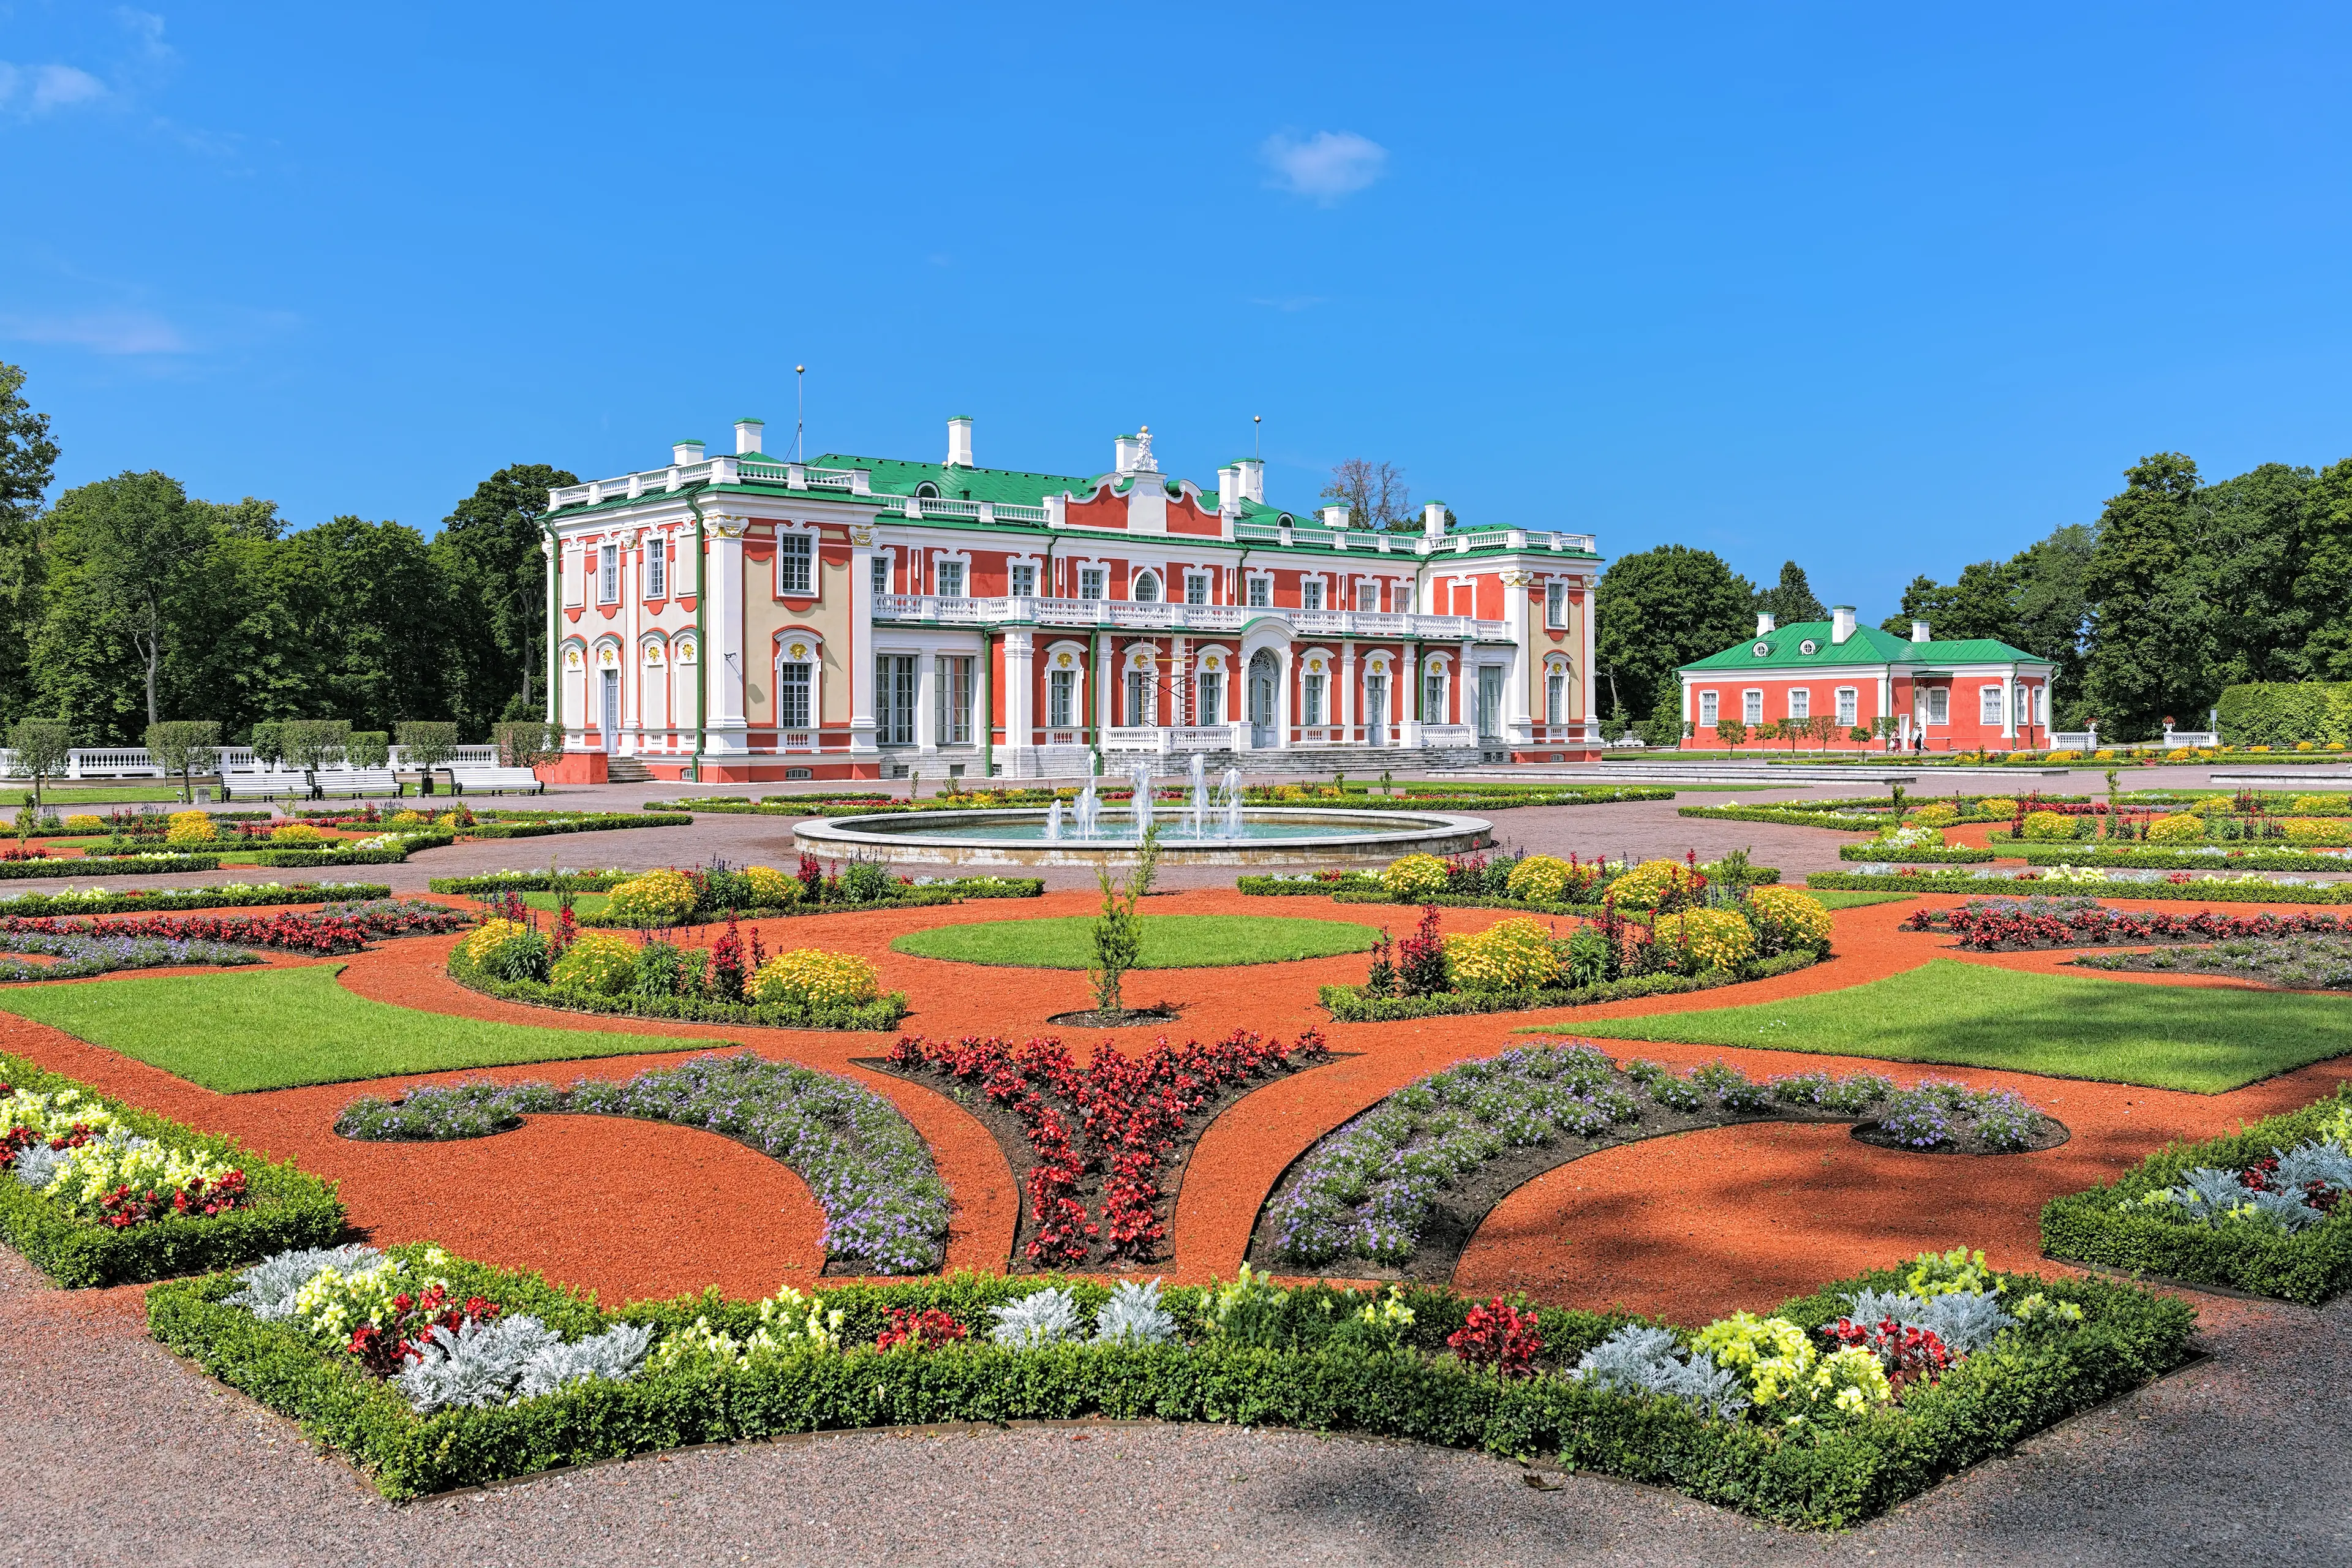 Kadriorg Palace is a Petrine Baroque palace built for Catherine I of Russia by Peter the Great